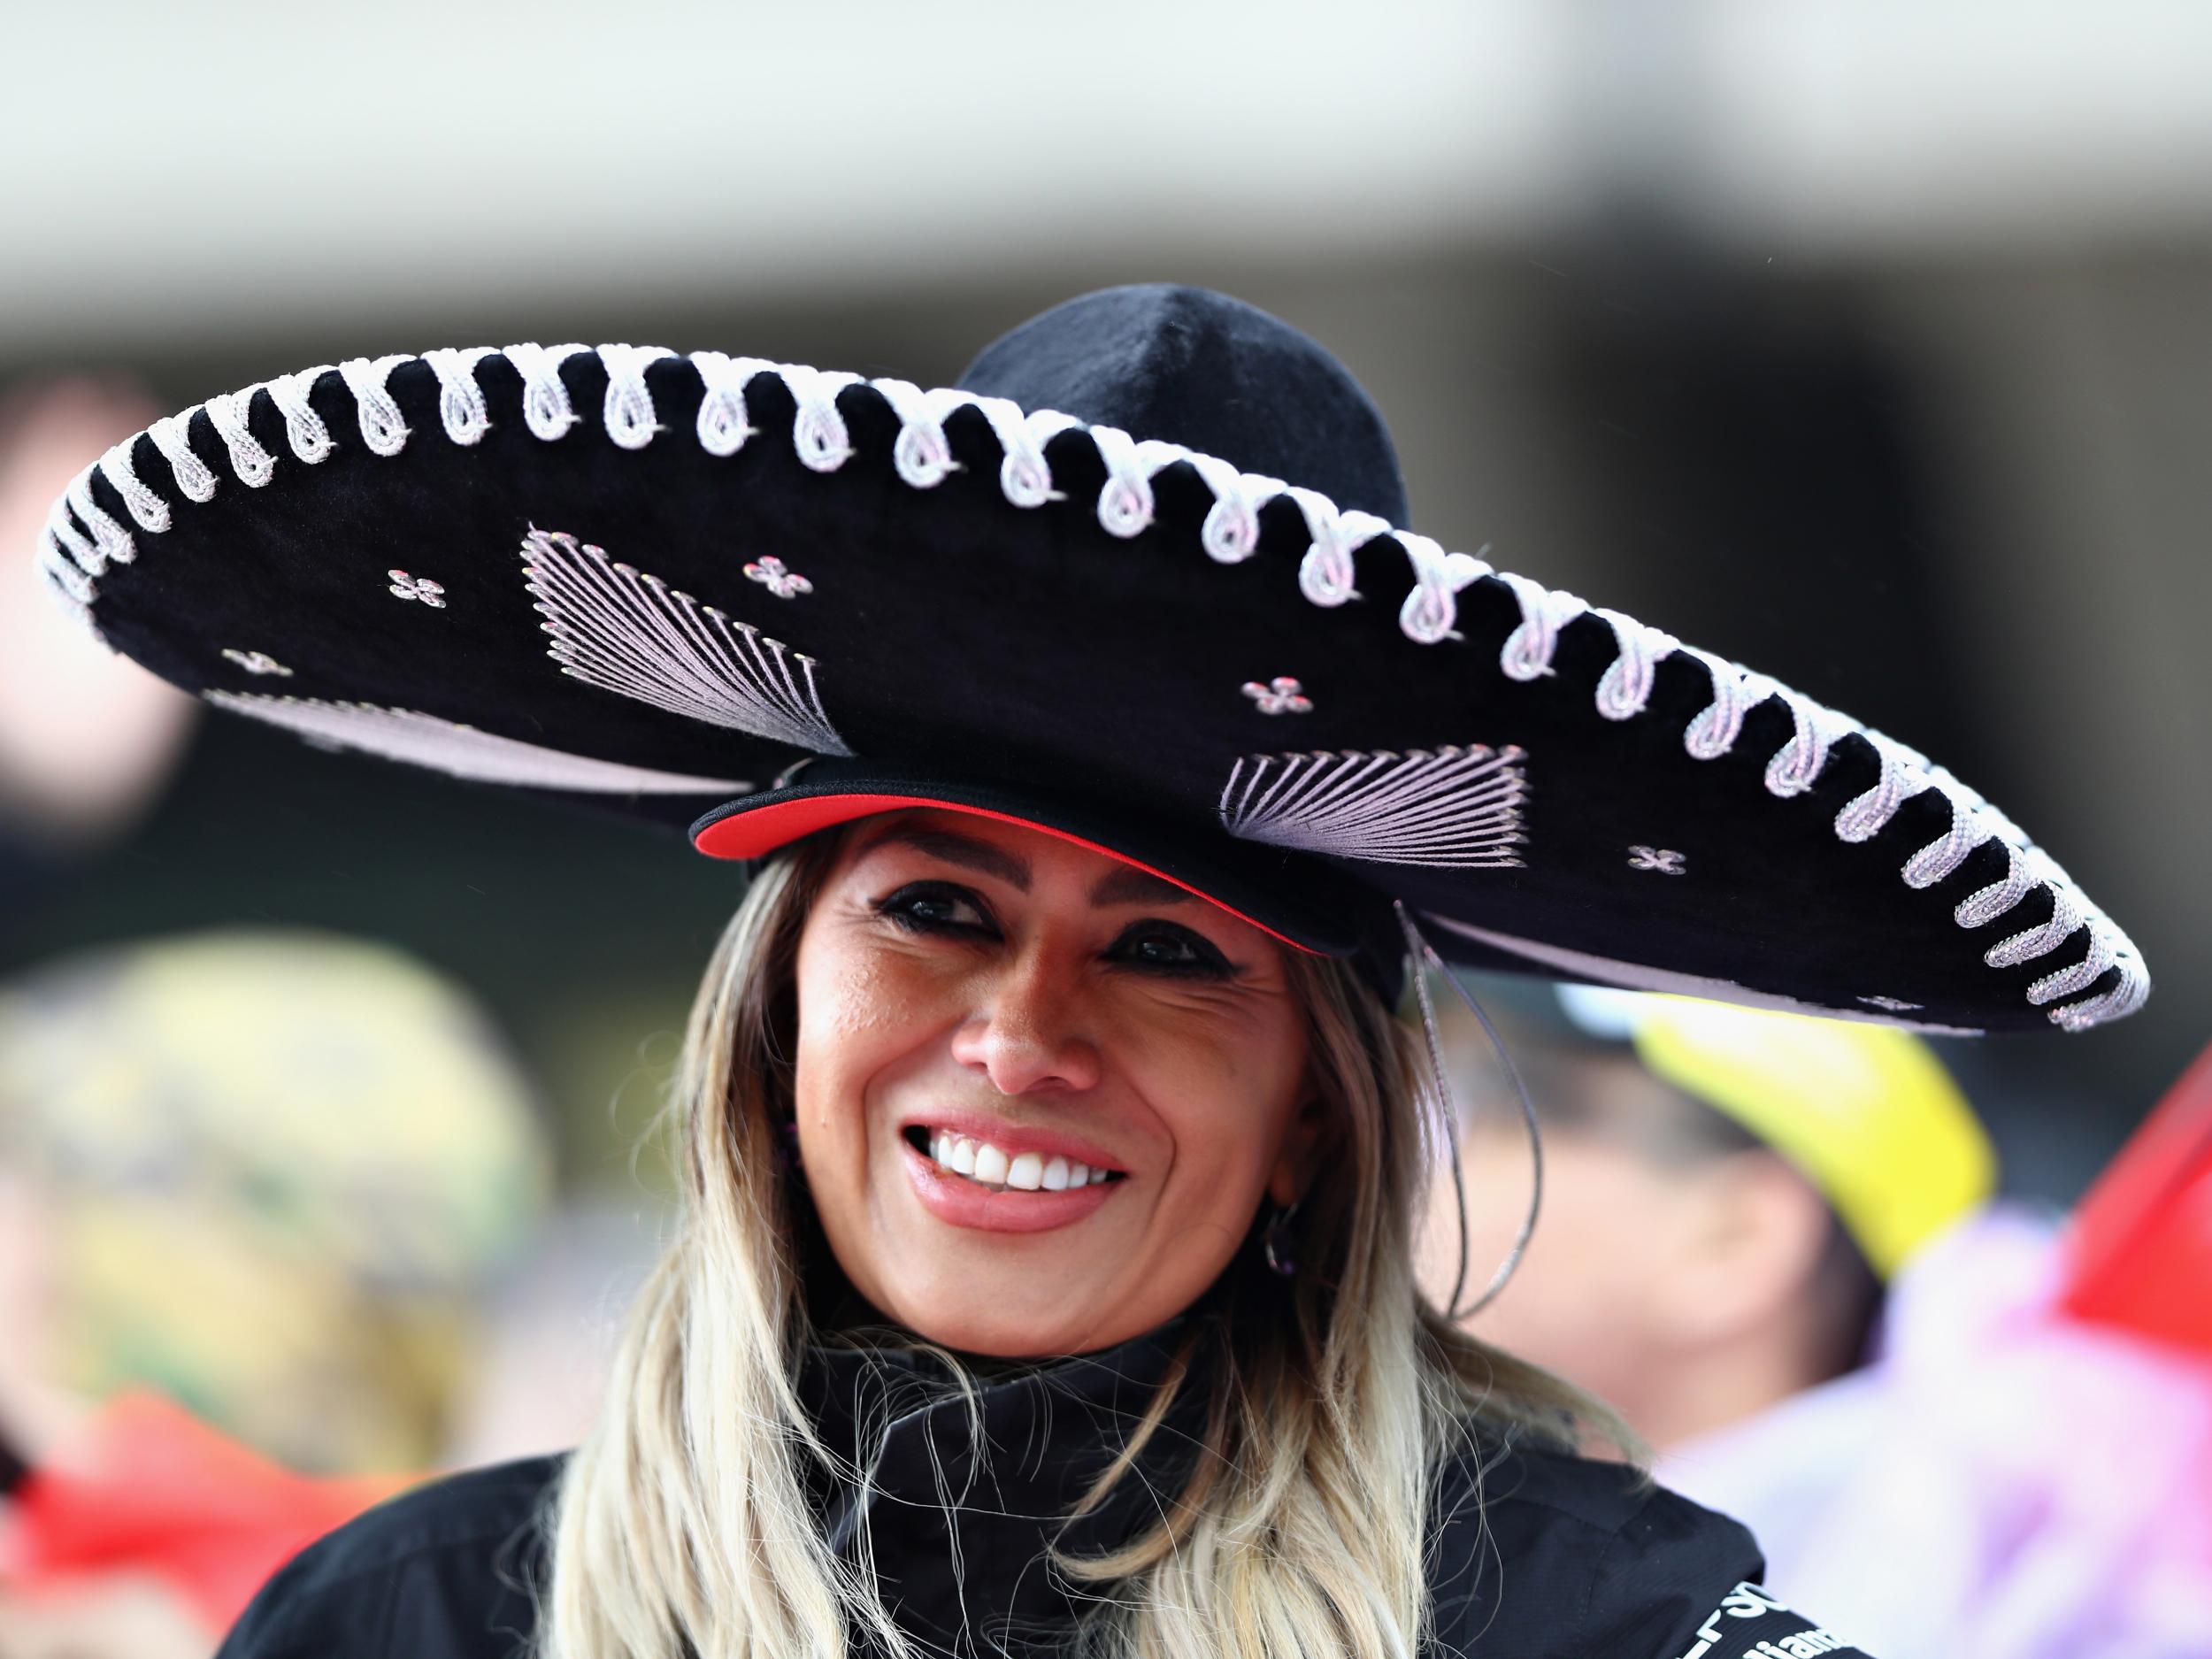  Brimful of anger: sombreros are considered ‘culturally insensitive’ costumes at Sheffield University